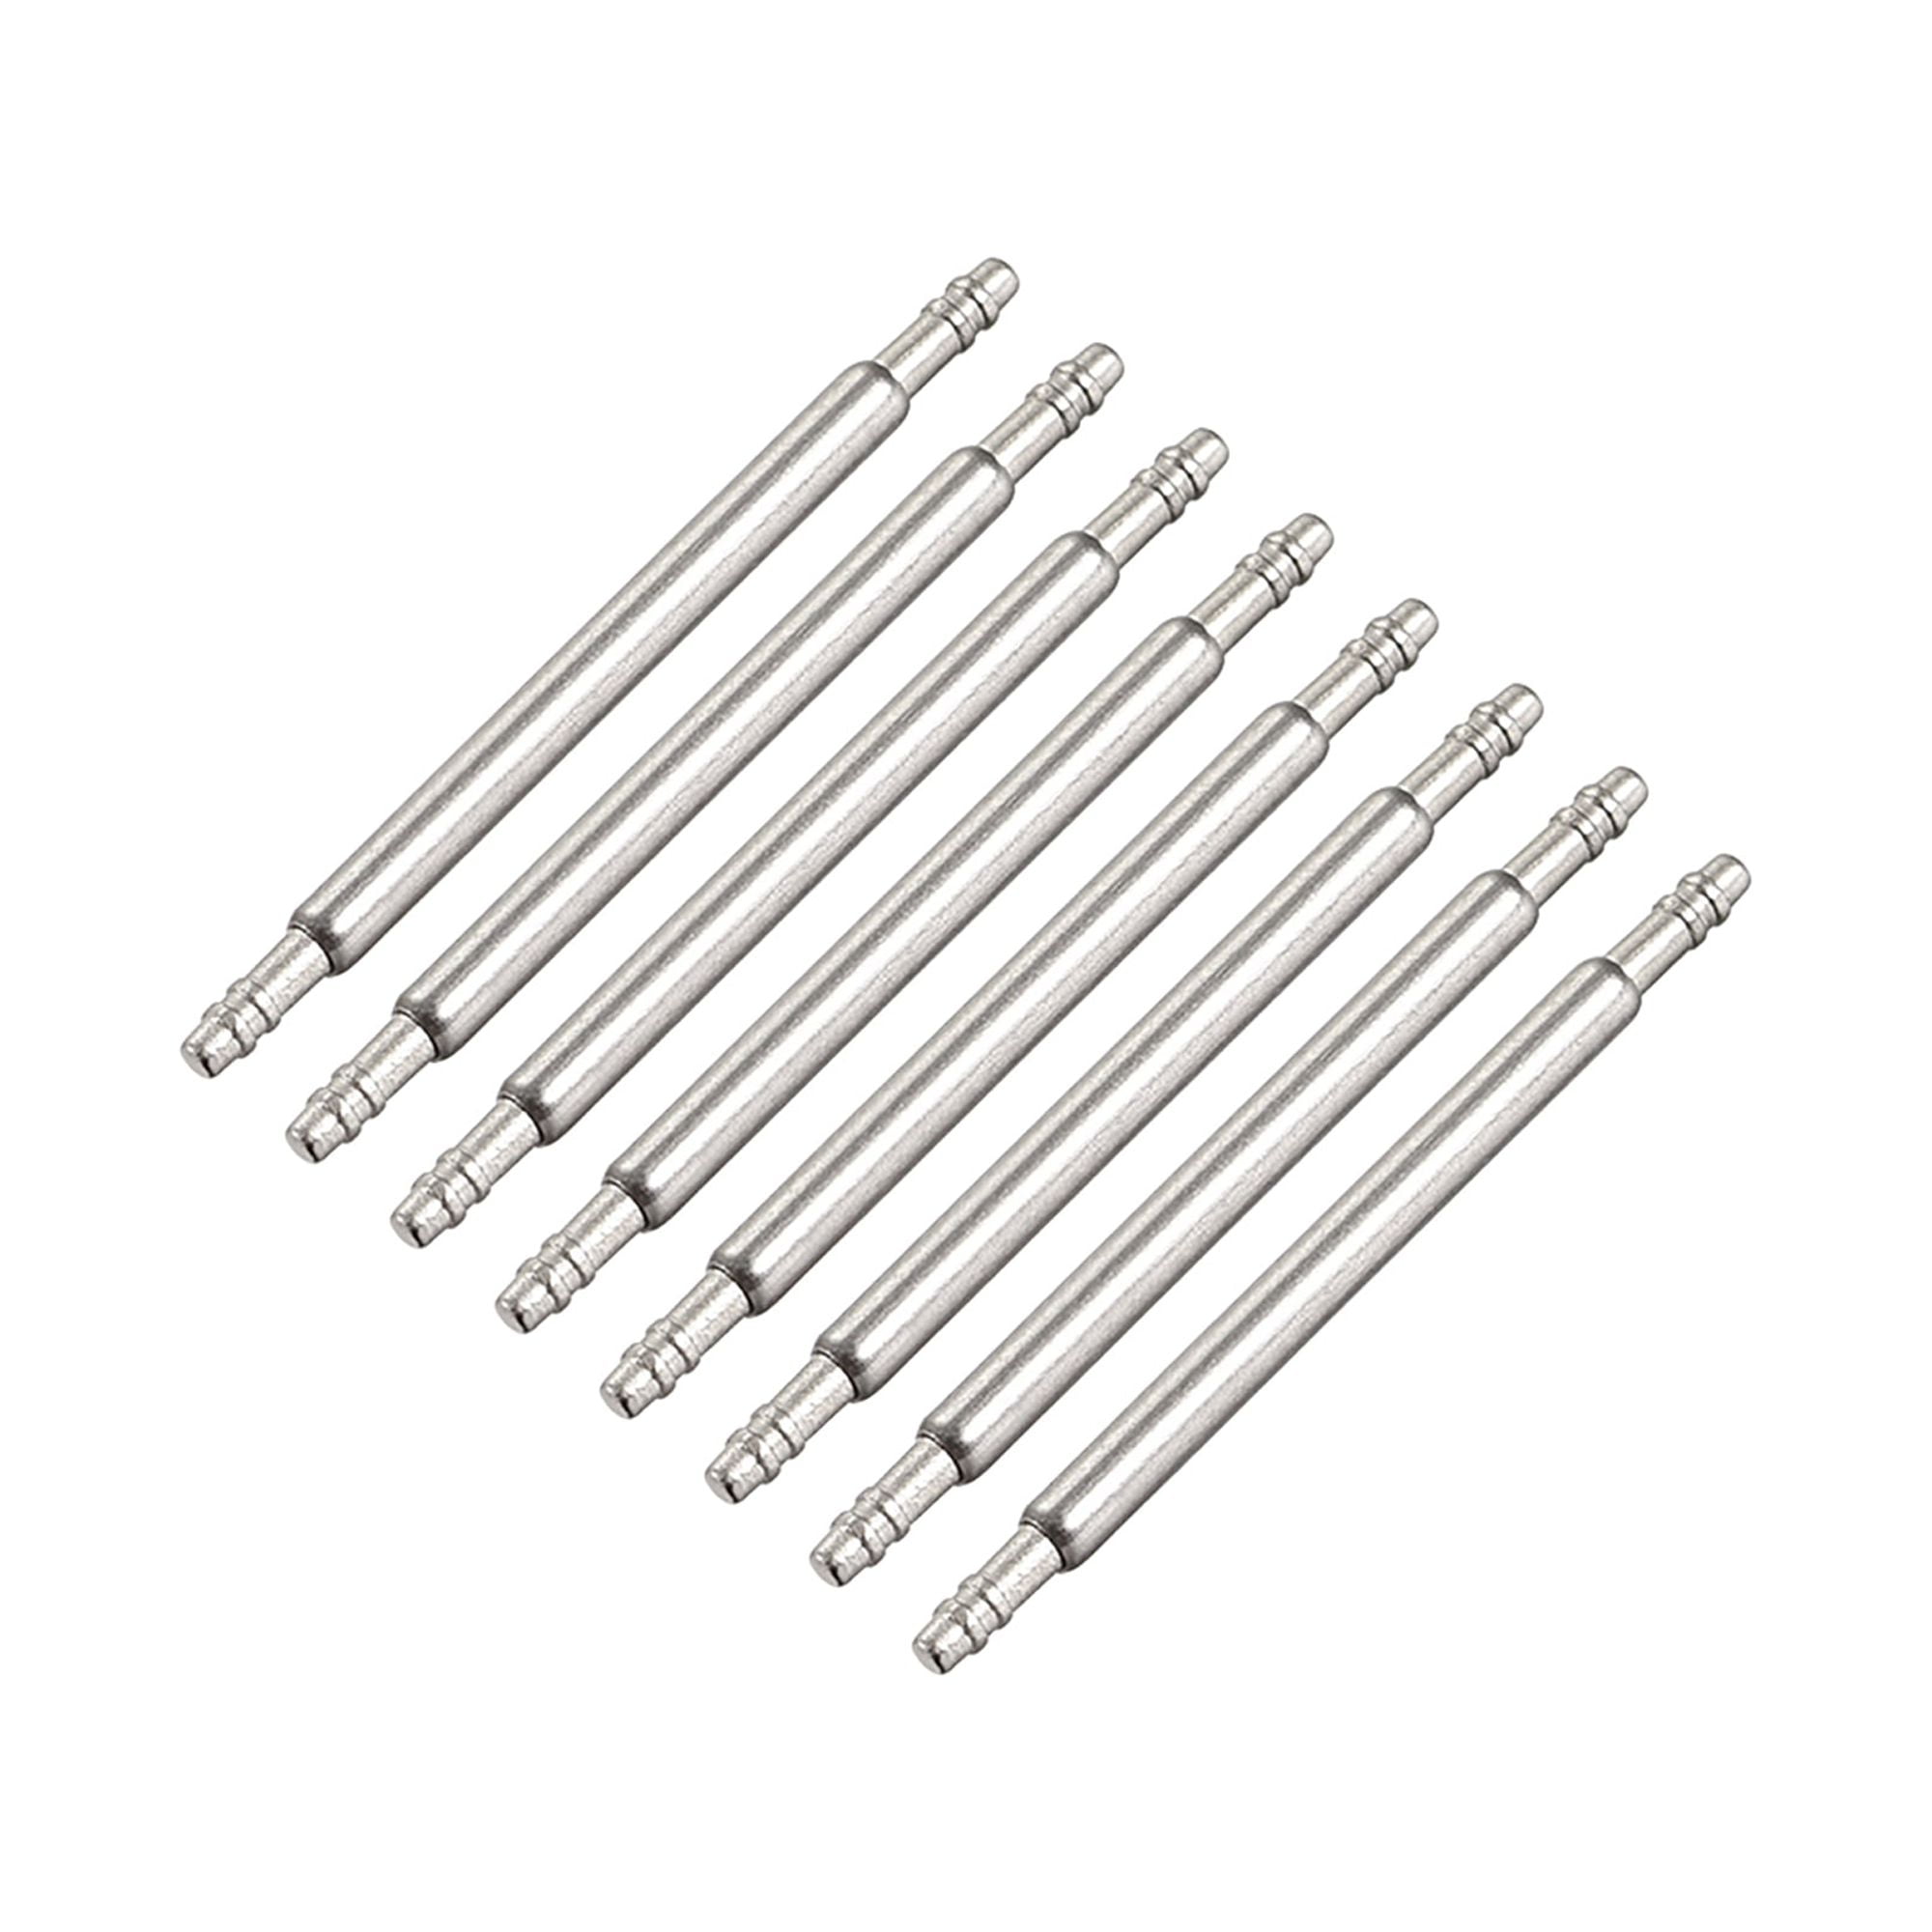 Spring Bar Pins 16mm x 1.5mm Double Fringe Stainless Steel Watch Band Pins Replacement Watch Lug Link Pins 8pcs, Adult Unisex, Size: 16 mm x 1.5 mm